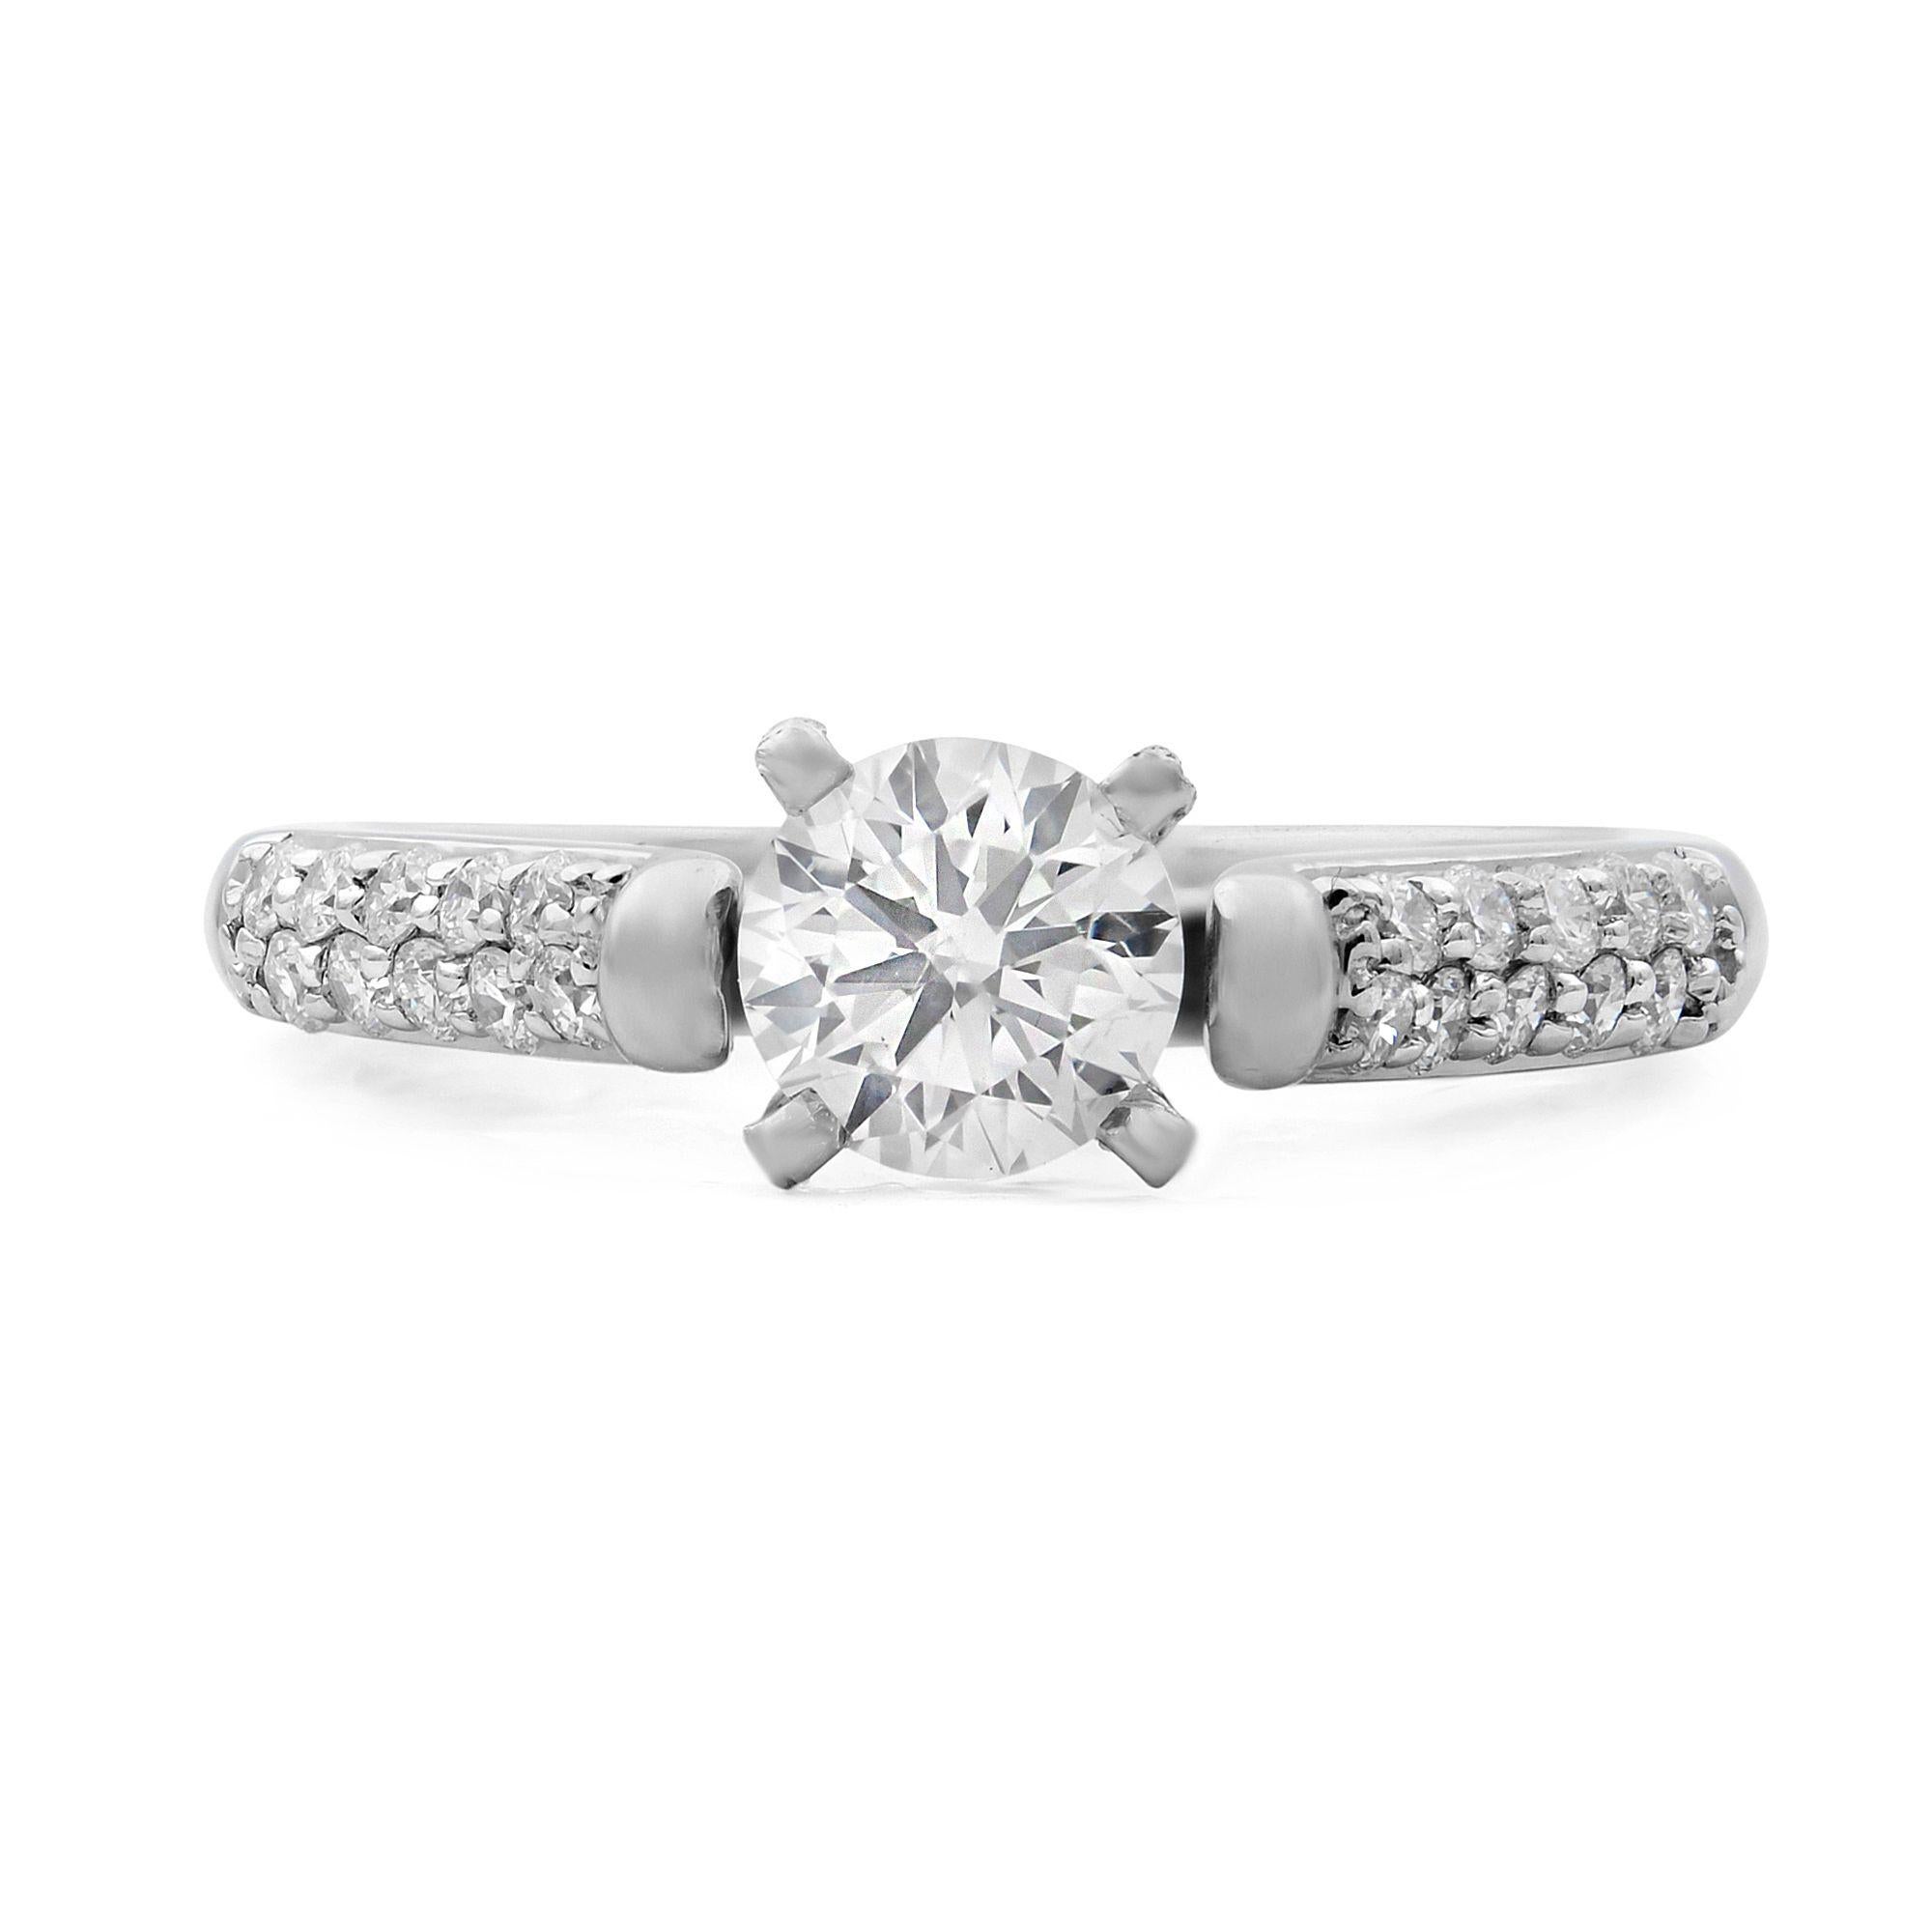 This is an elegant 14k white gold diamond engagement ring. A round-cut diamond center stone serves as the focal point, while diamond accents adorn the band with eye-catching sparkle. Center stone 0.50. Total carat weight of the ring 0.75. Ring size